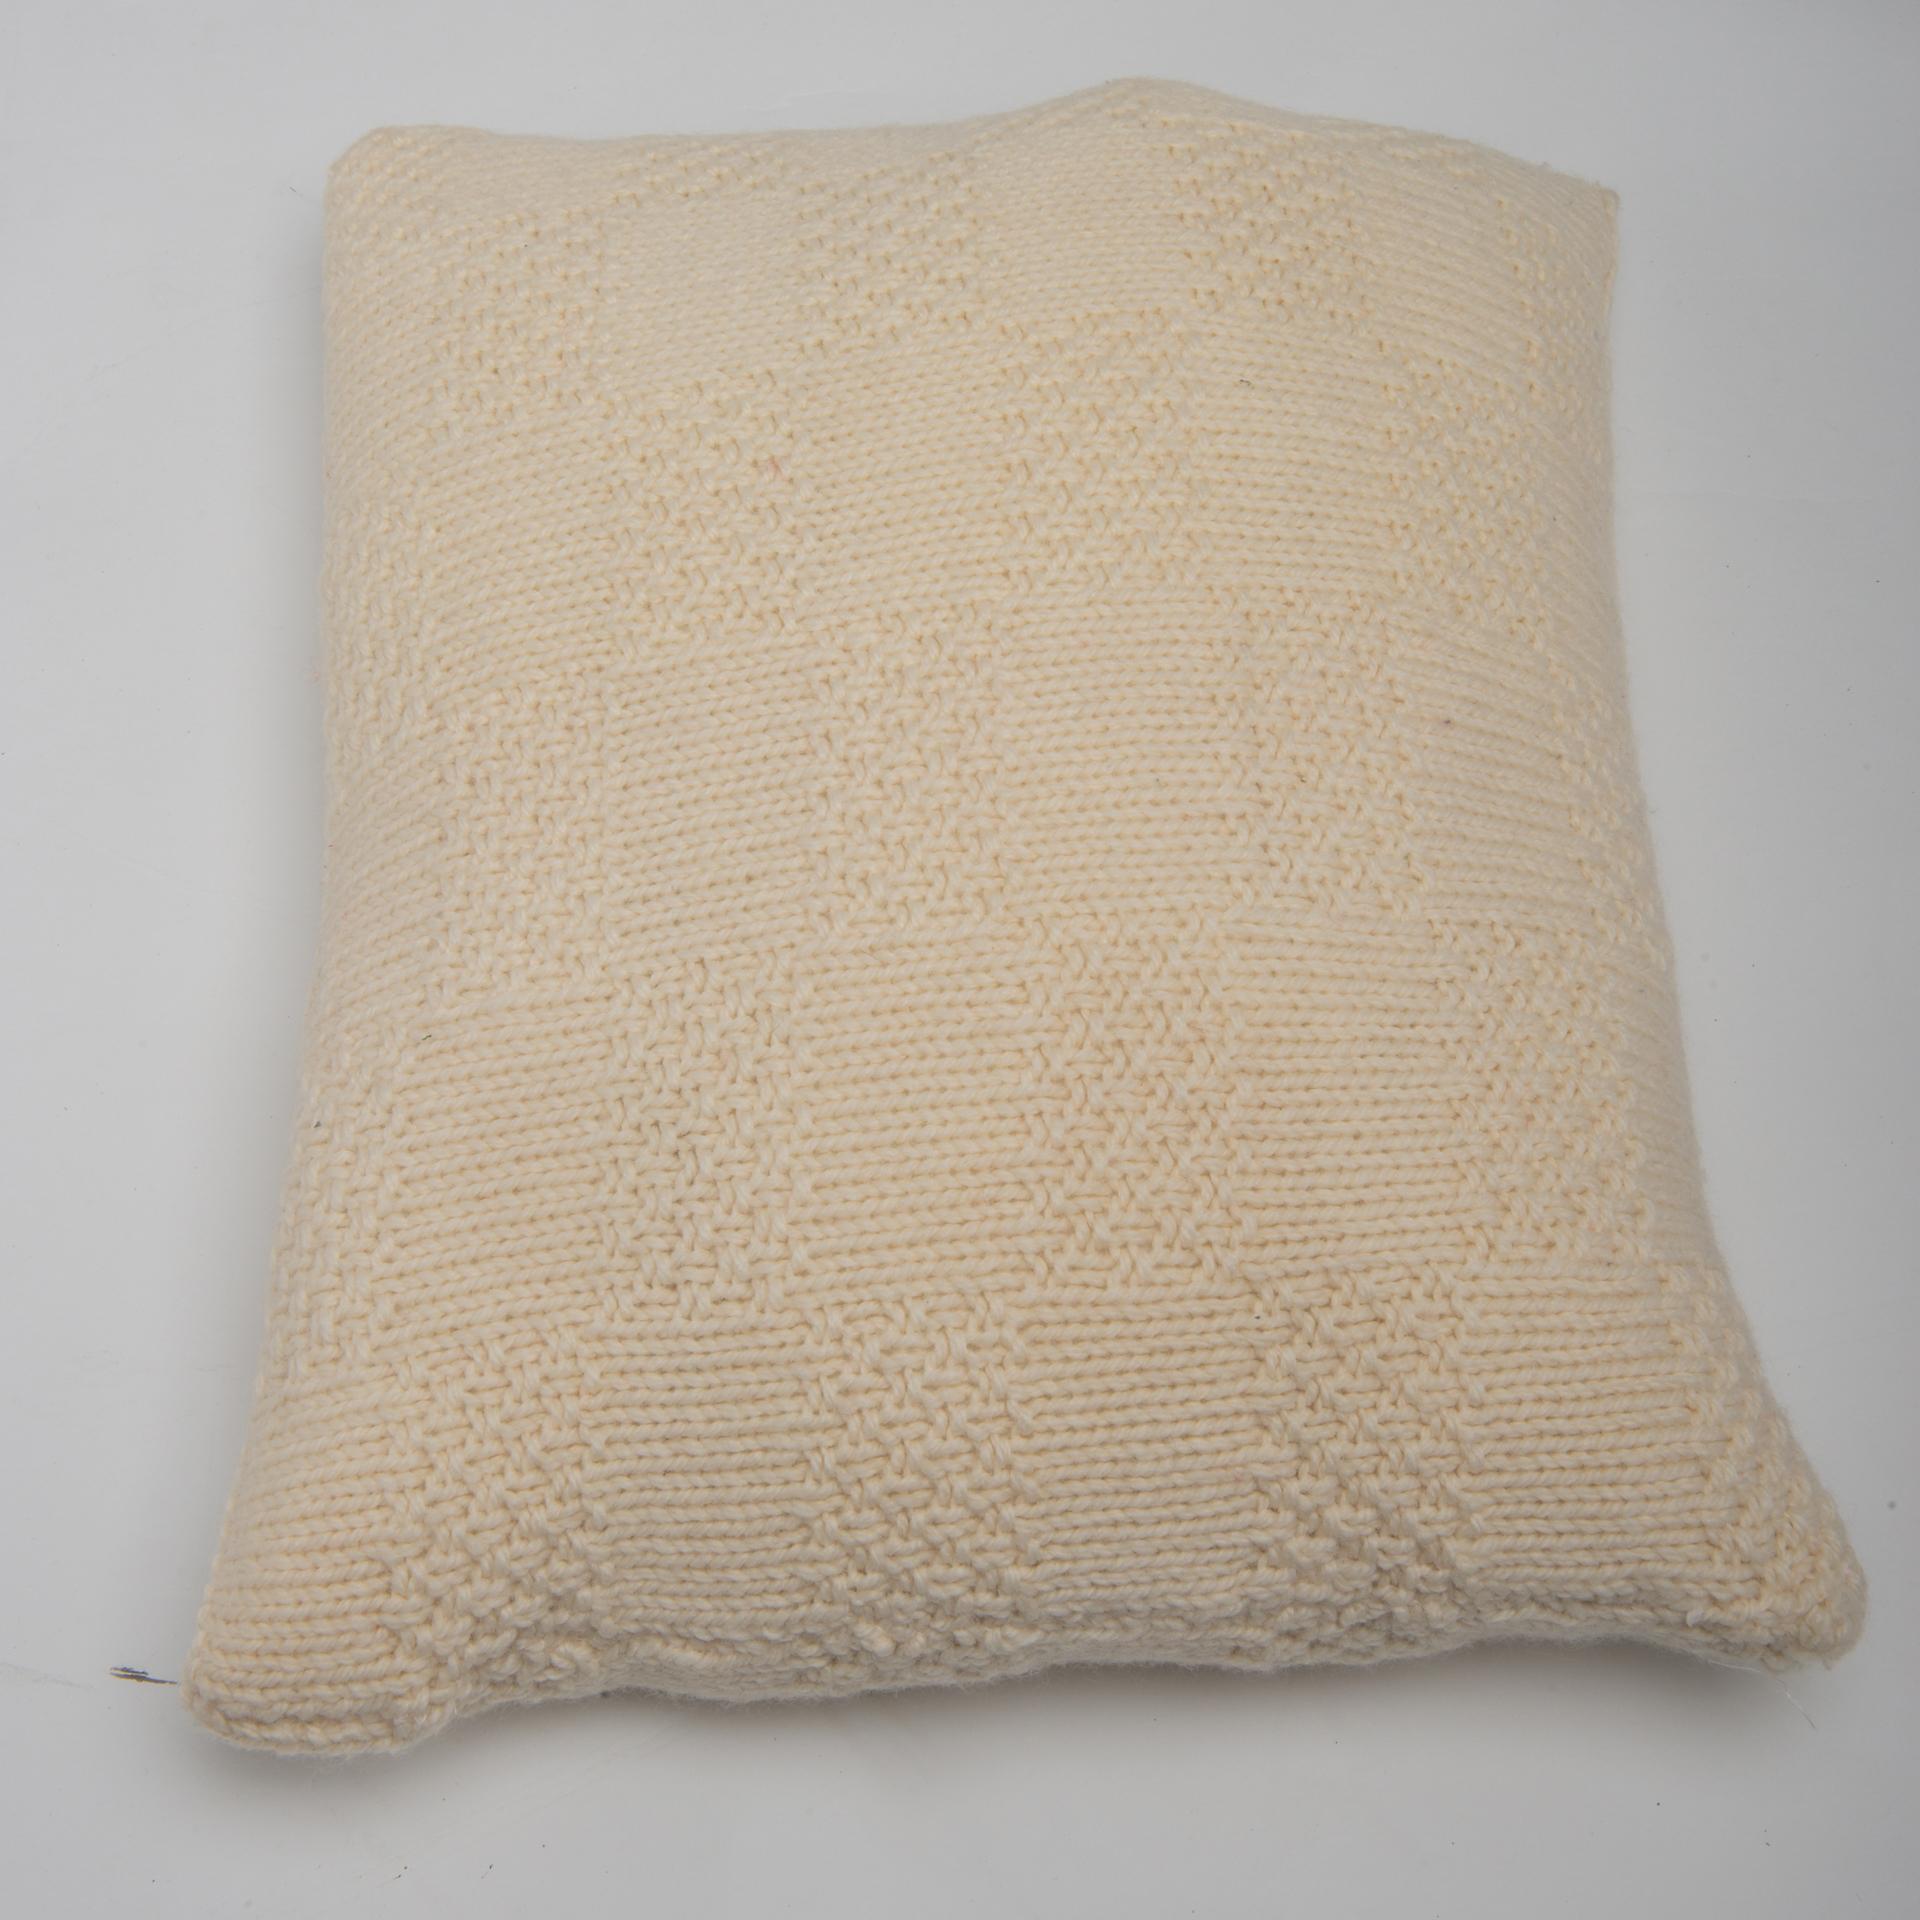 Handmade Simple White Wool Pillow In Excellent Condition For Sale In Alessandria, Piemonte